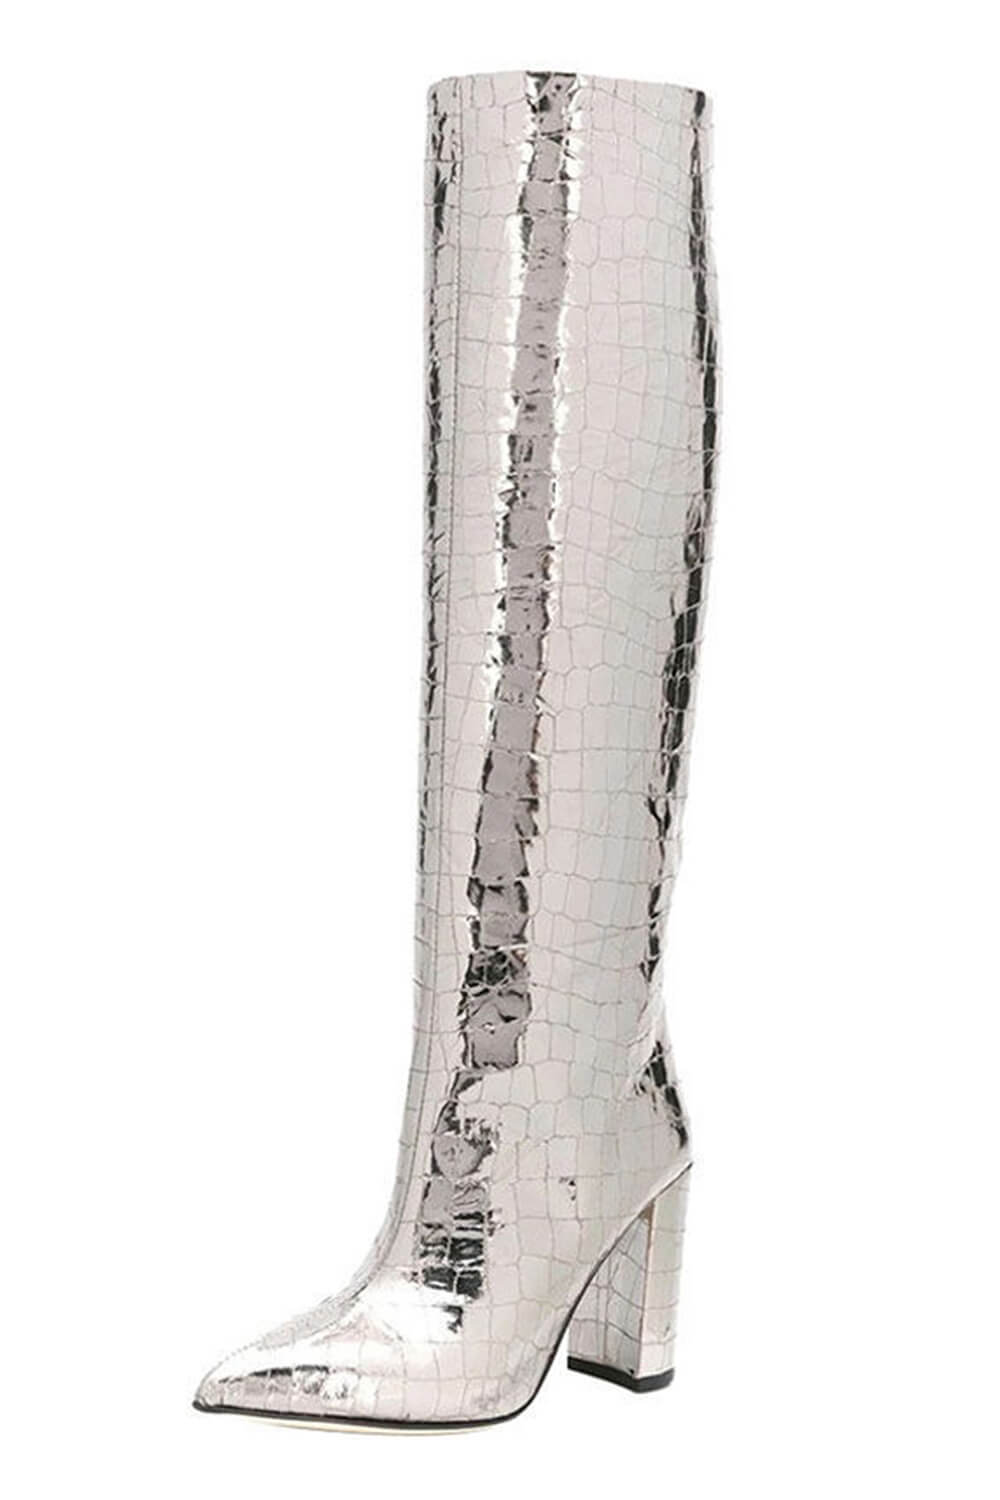 Croc-Effect Faux Leather Pointed Toe Block Heel Knee-High Boots - Silver